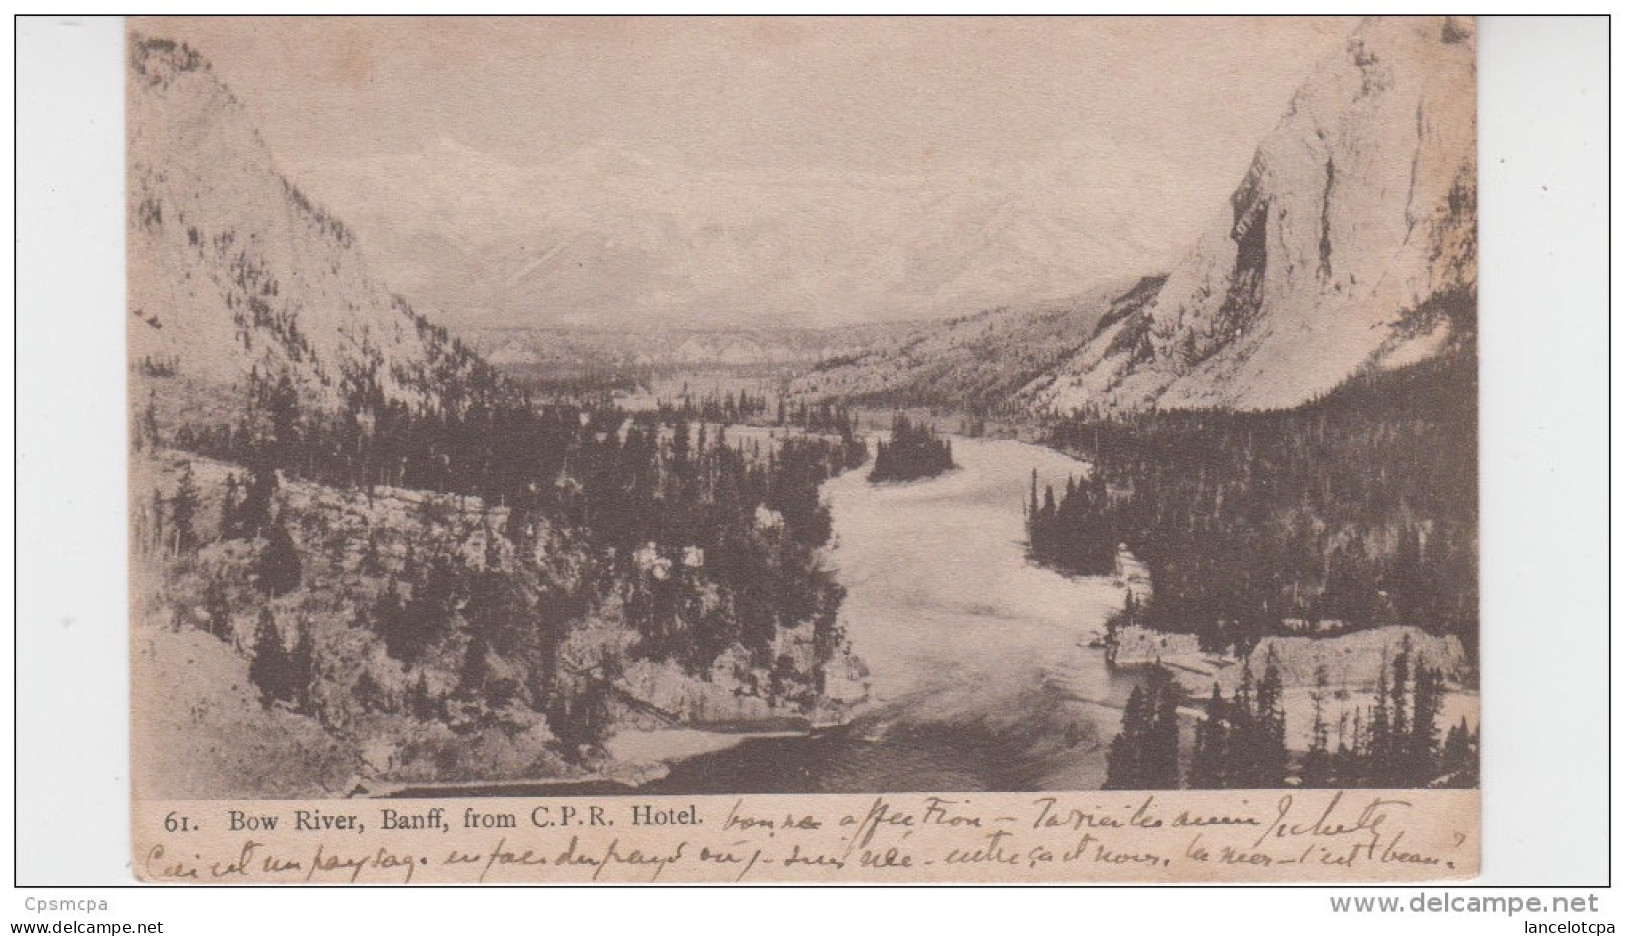 BOW RIVER - BANFF - FROM C.P.R. HOTEL - Banff